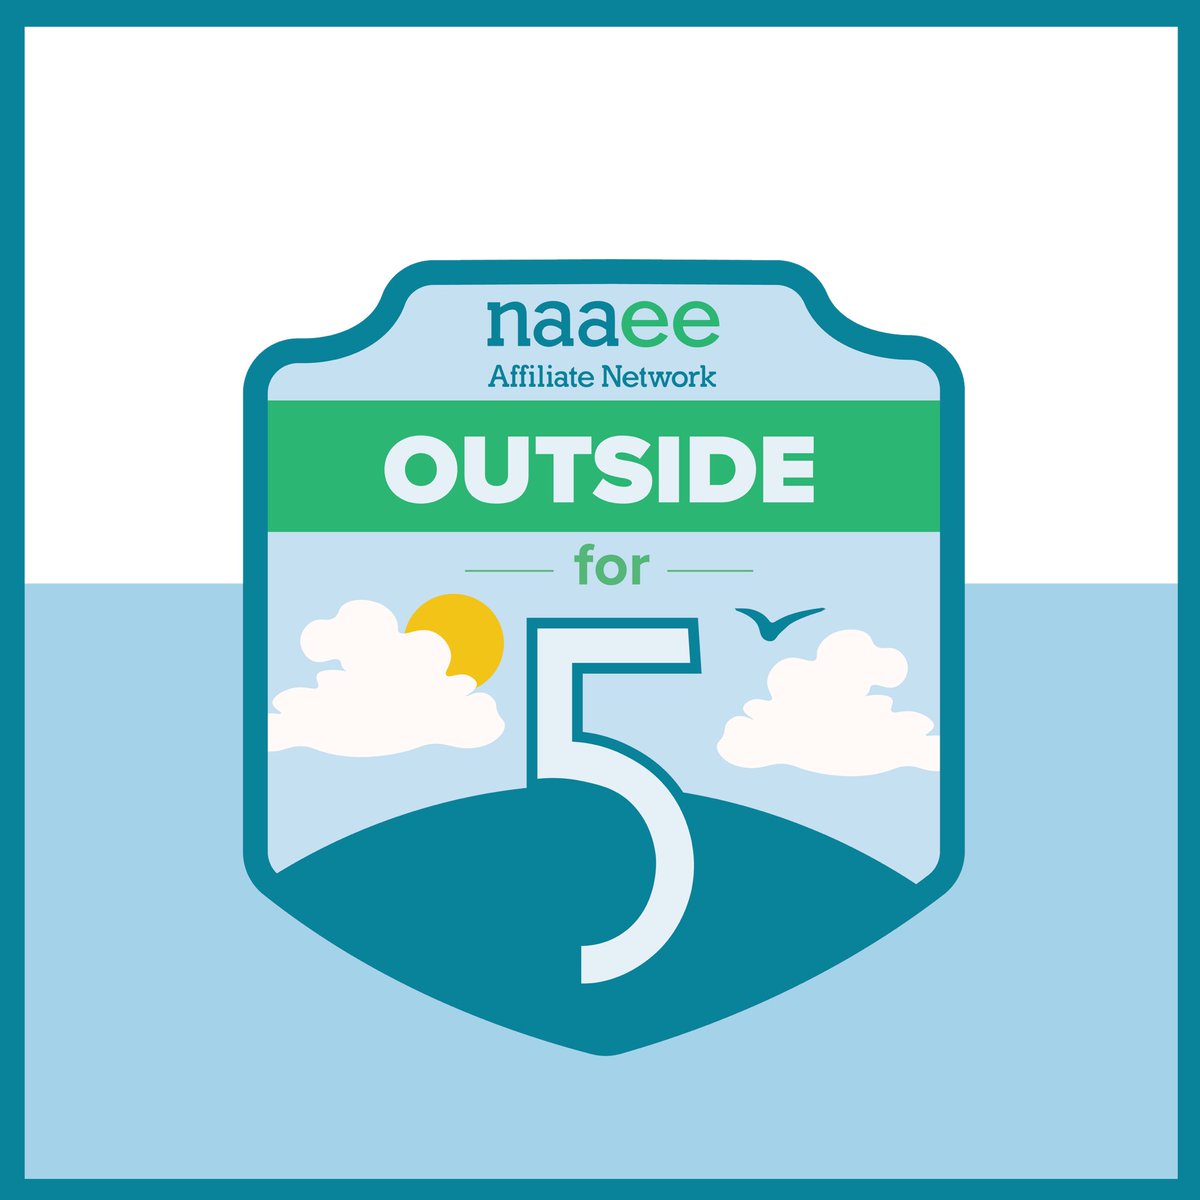 Let's Get Outside for 5! Get started by taking the Outside for 5 pledge to invest in the health and well-being of your school community. outsidefor5.com #GEOEC #OutdoorEd #GetOutside #TakeMeOutside #OptOutside #VitaminN @theNAAEE